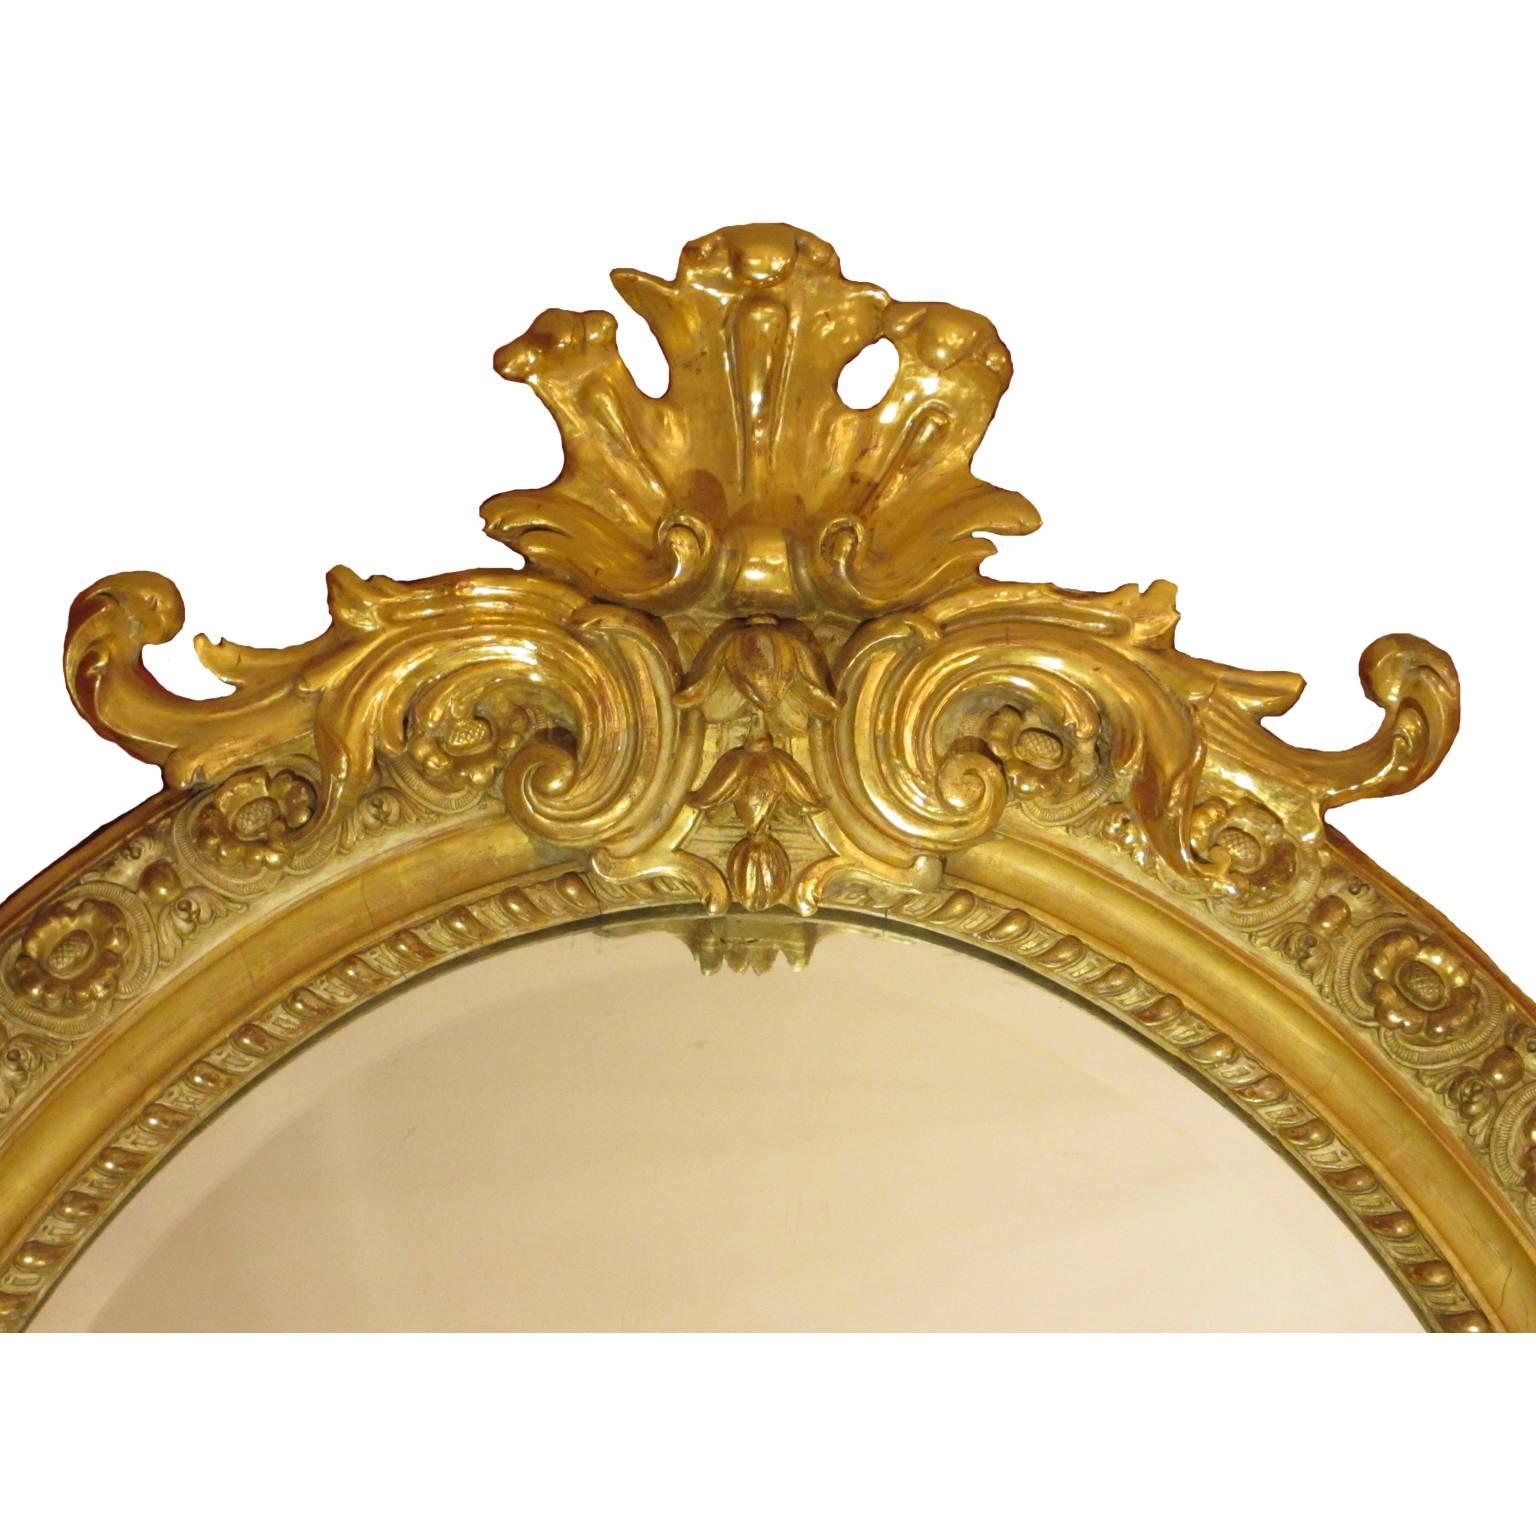 A fine and large French 19th century Louis XVI style giltwood and gesso carved oval mirror frame with a beveled glass plate. All gilding original. The ornately decorated frame with a floral design and crowned with a scrolled and acanthus leaves